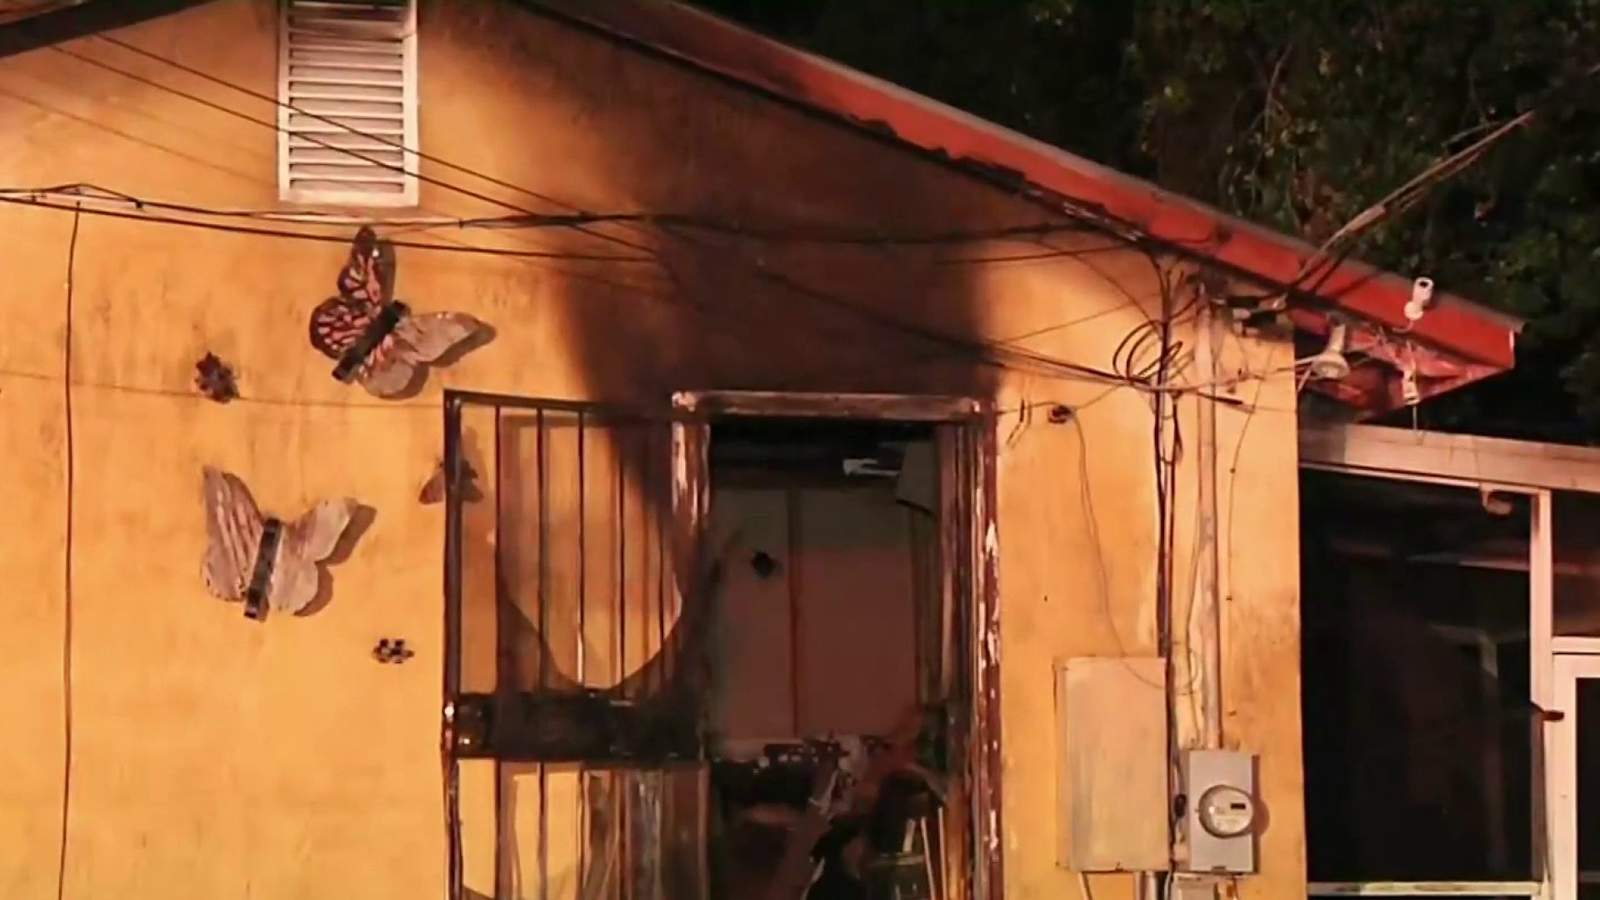 5 displaced after fire scorches Orange County home